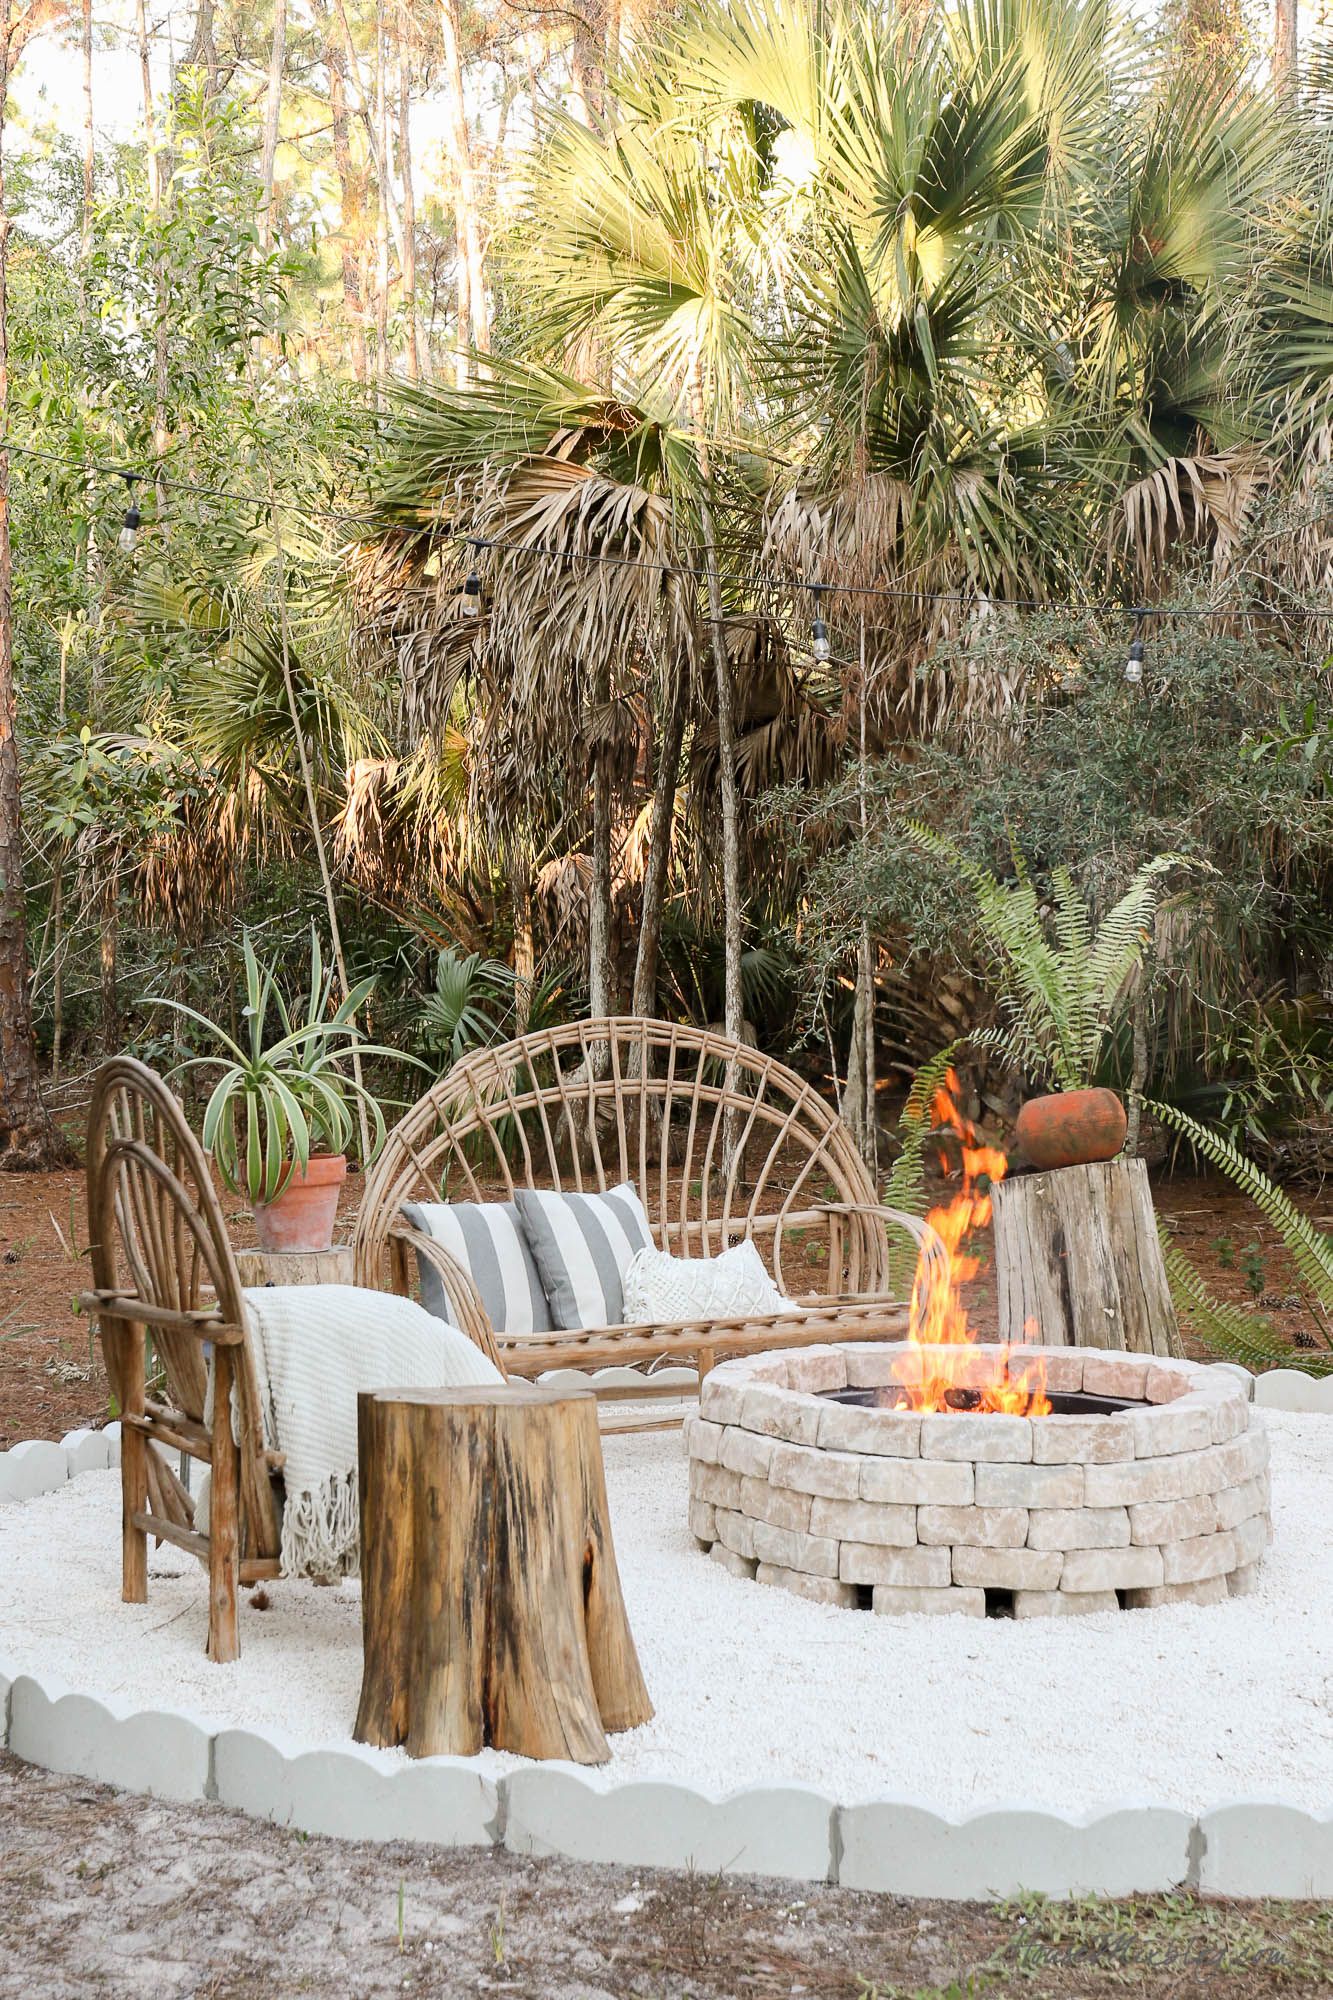 How To Add Exterior Warmth With A Fire Pit.